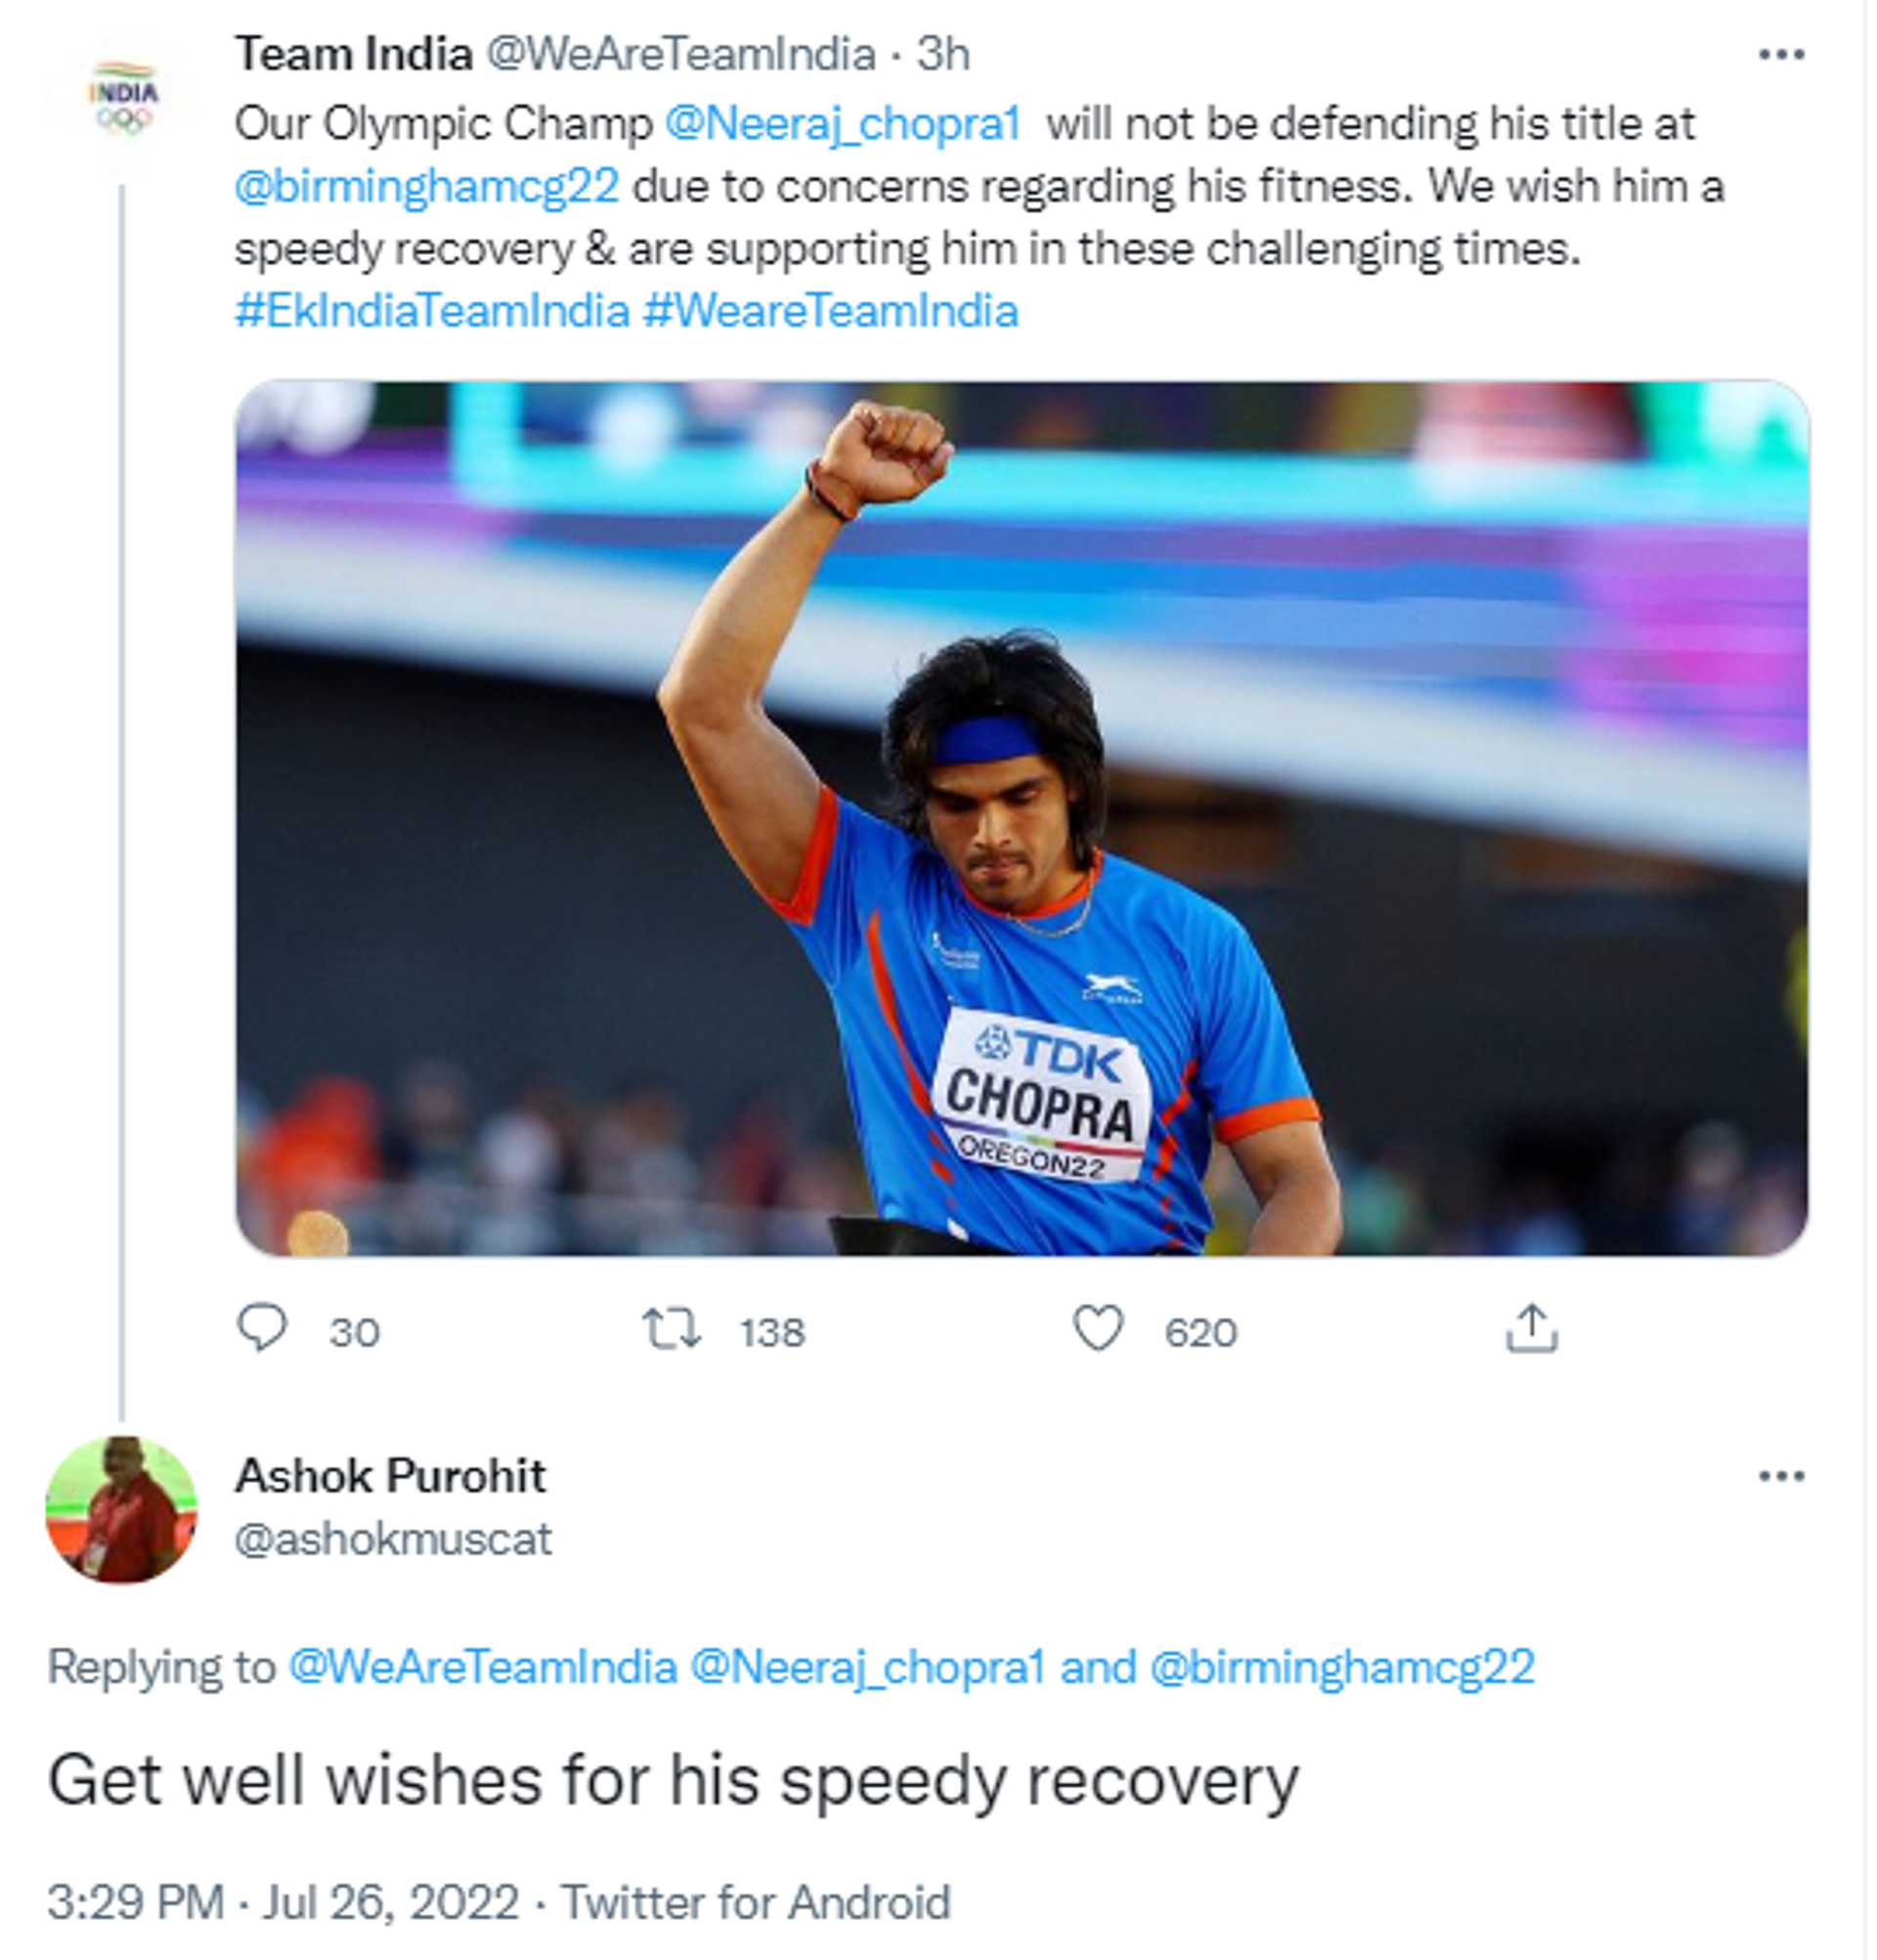 Netizens Wish Speedy Recovery to Neeraj Chopra after he Pulls Out of Commonwealth Games 2022 Due to Injury - Sputnik International, 1920, 26.07.2022